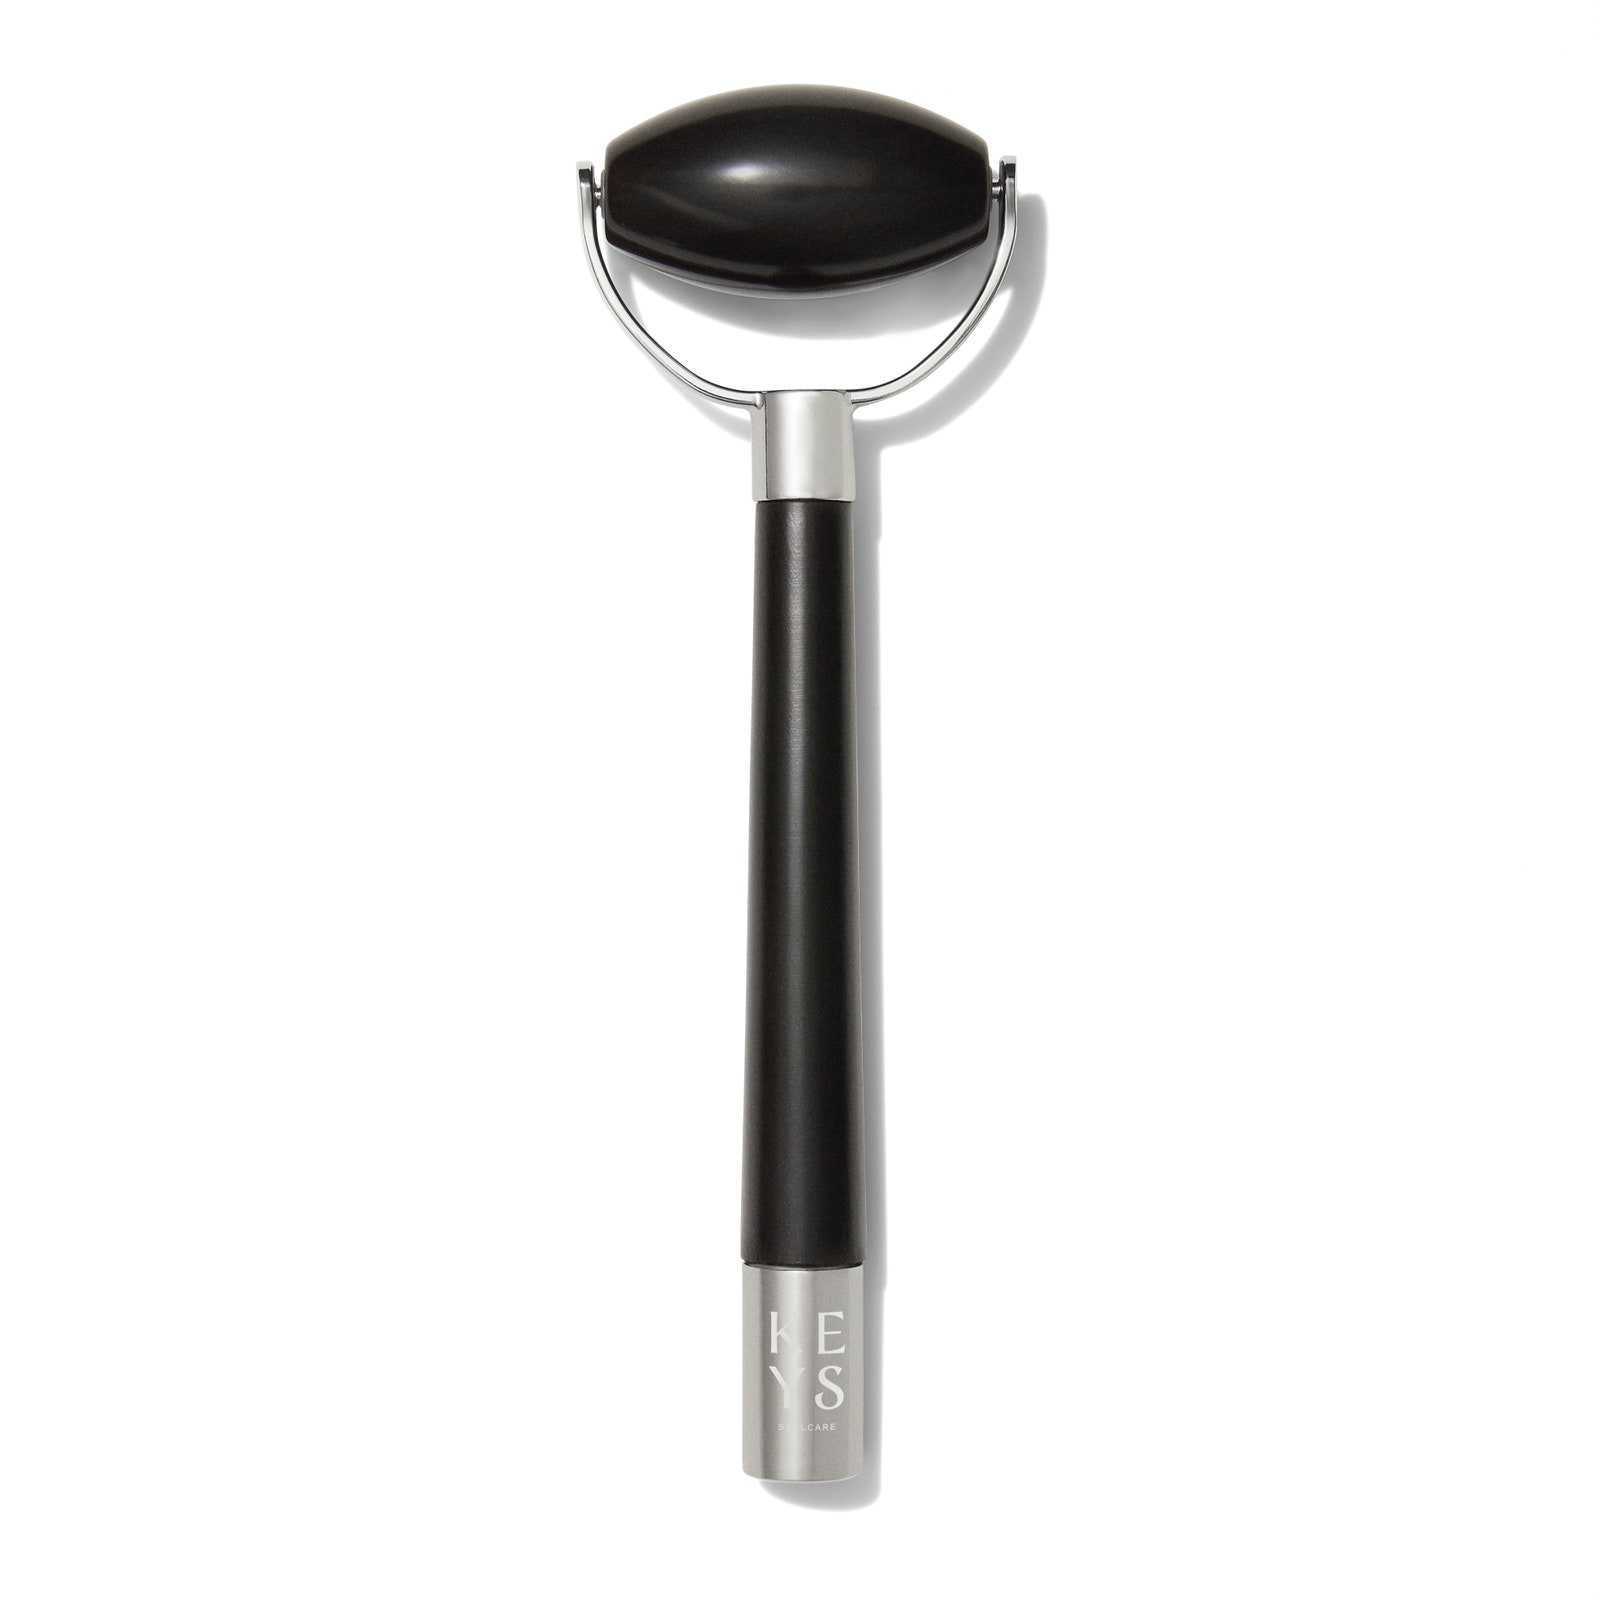 Keys Soulcare  Obsidian Facial Roller  on a white background